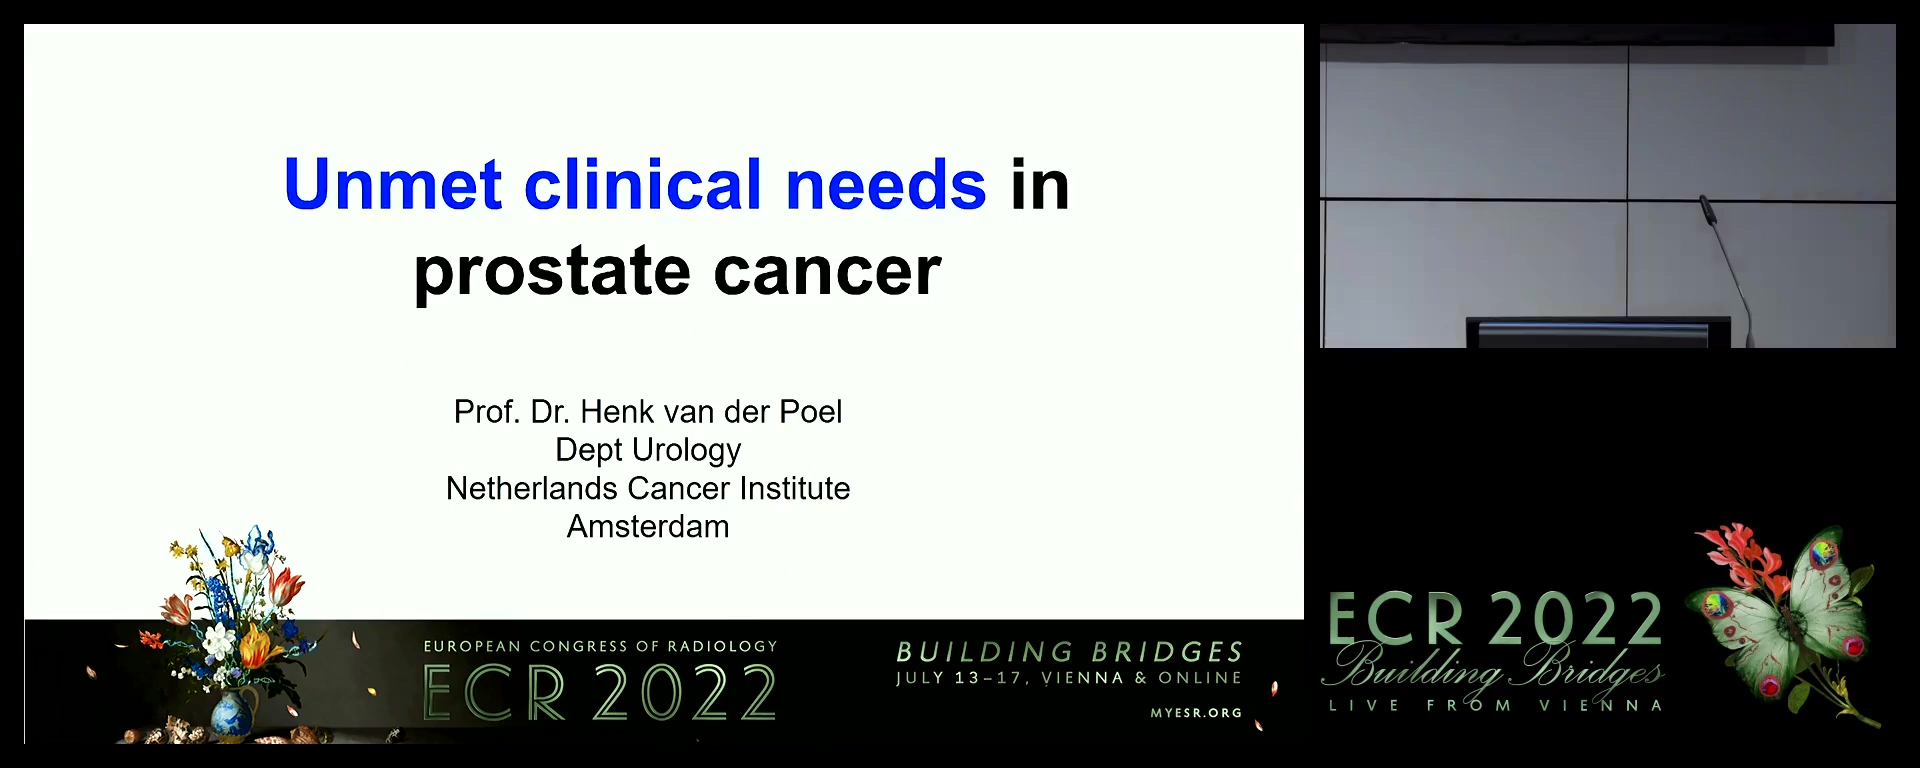 Unmet clinical needs in prostate cancer